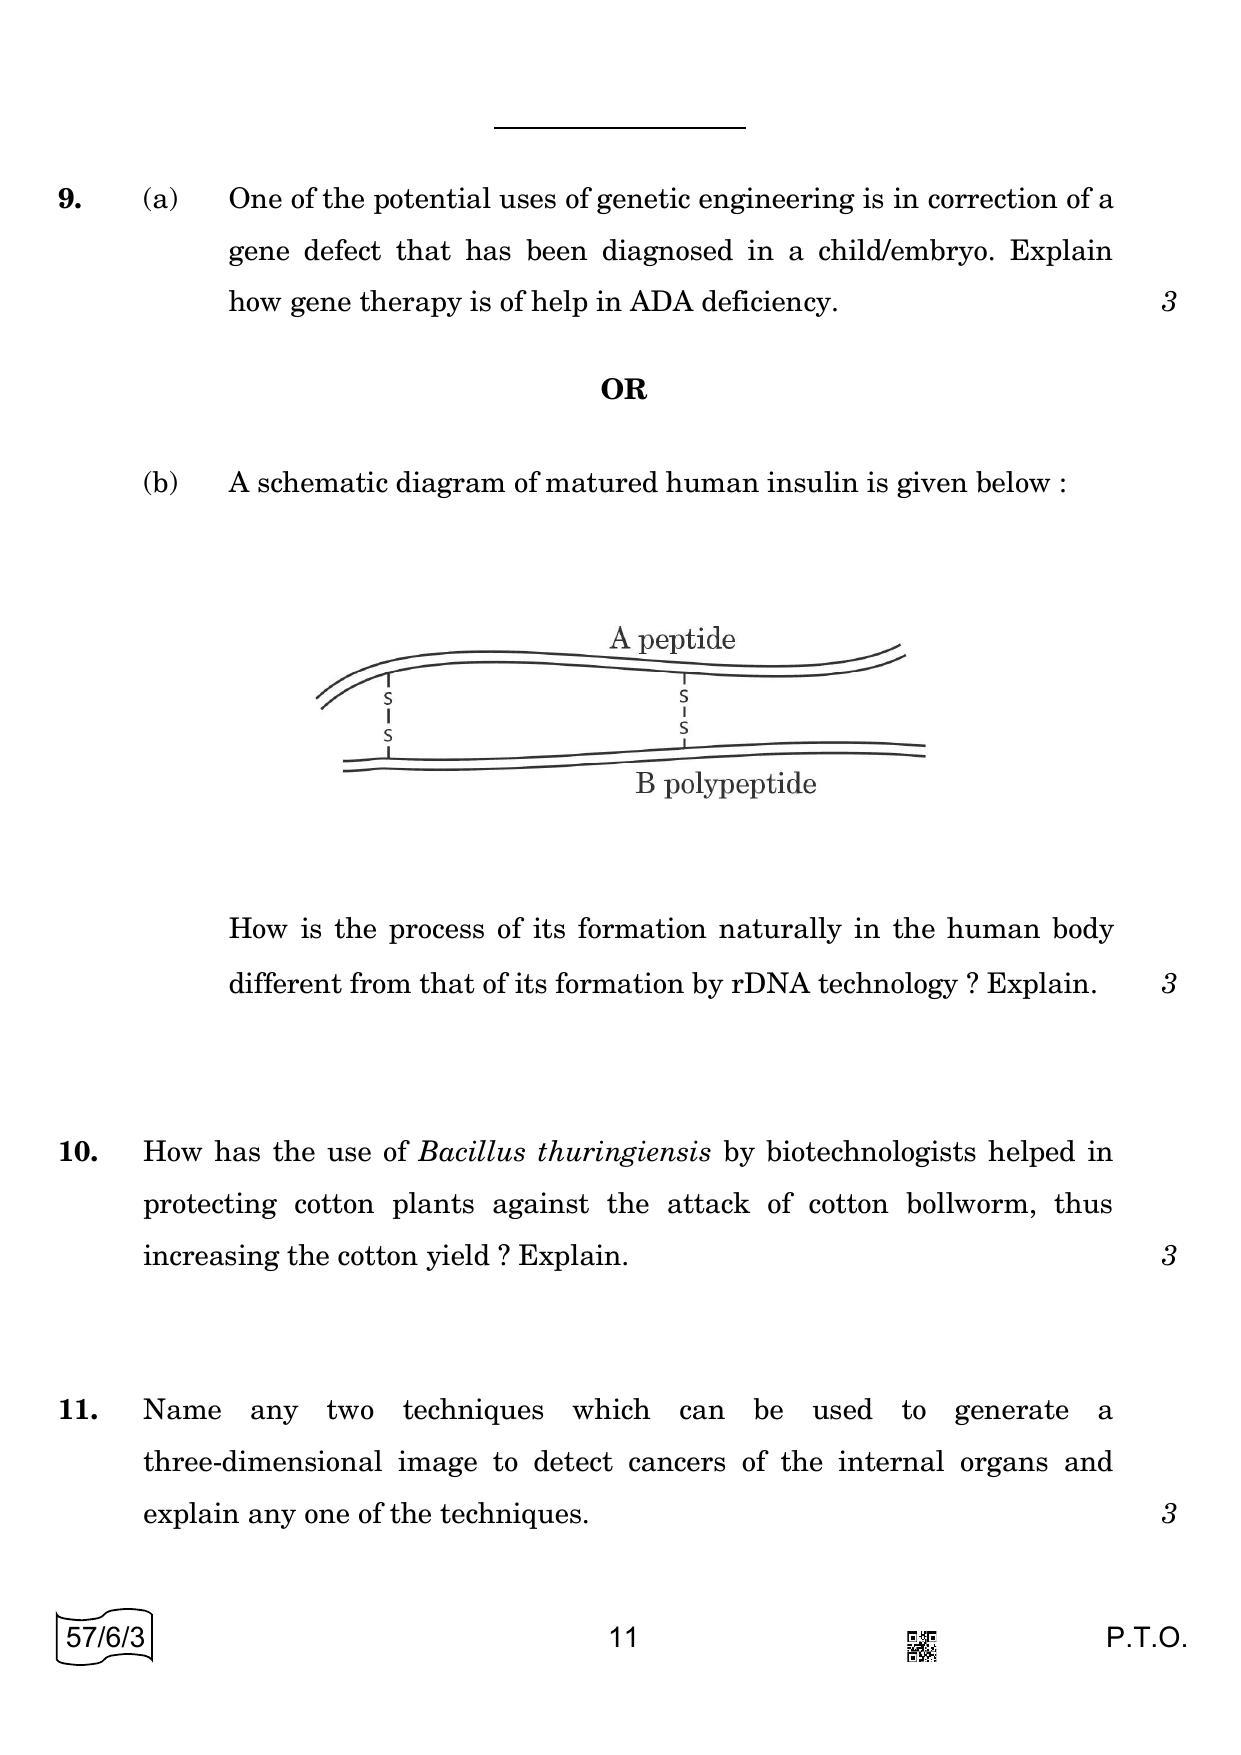 CBSE Class 12 57-6-3 BIOLOGY 2022 Compartment Question Paper - Page 11